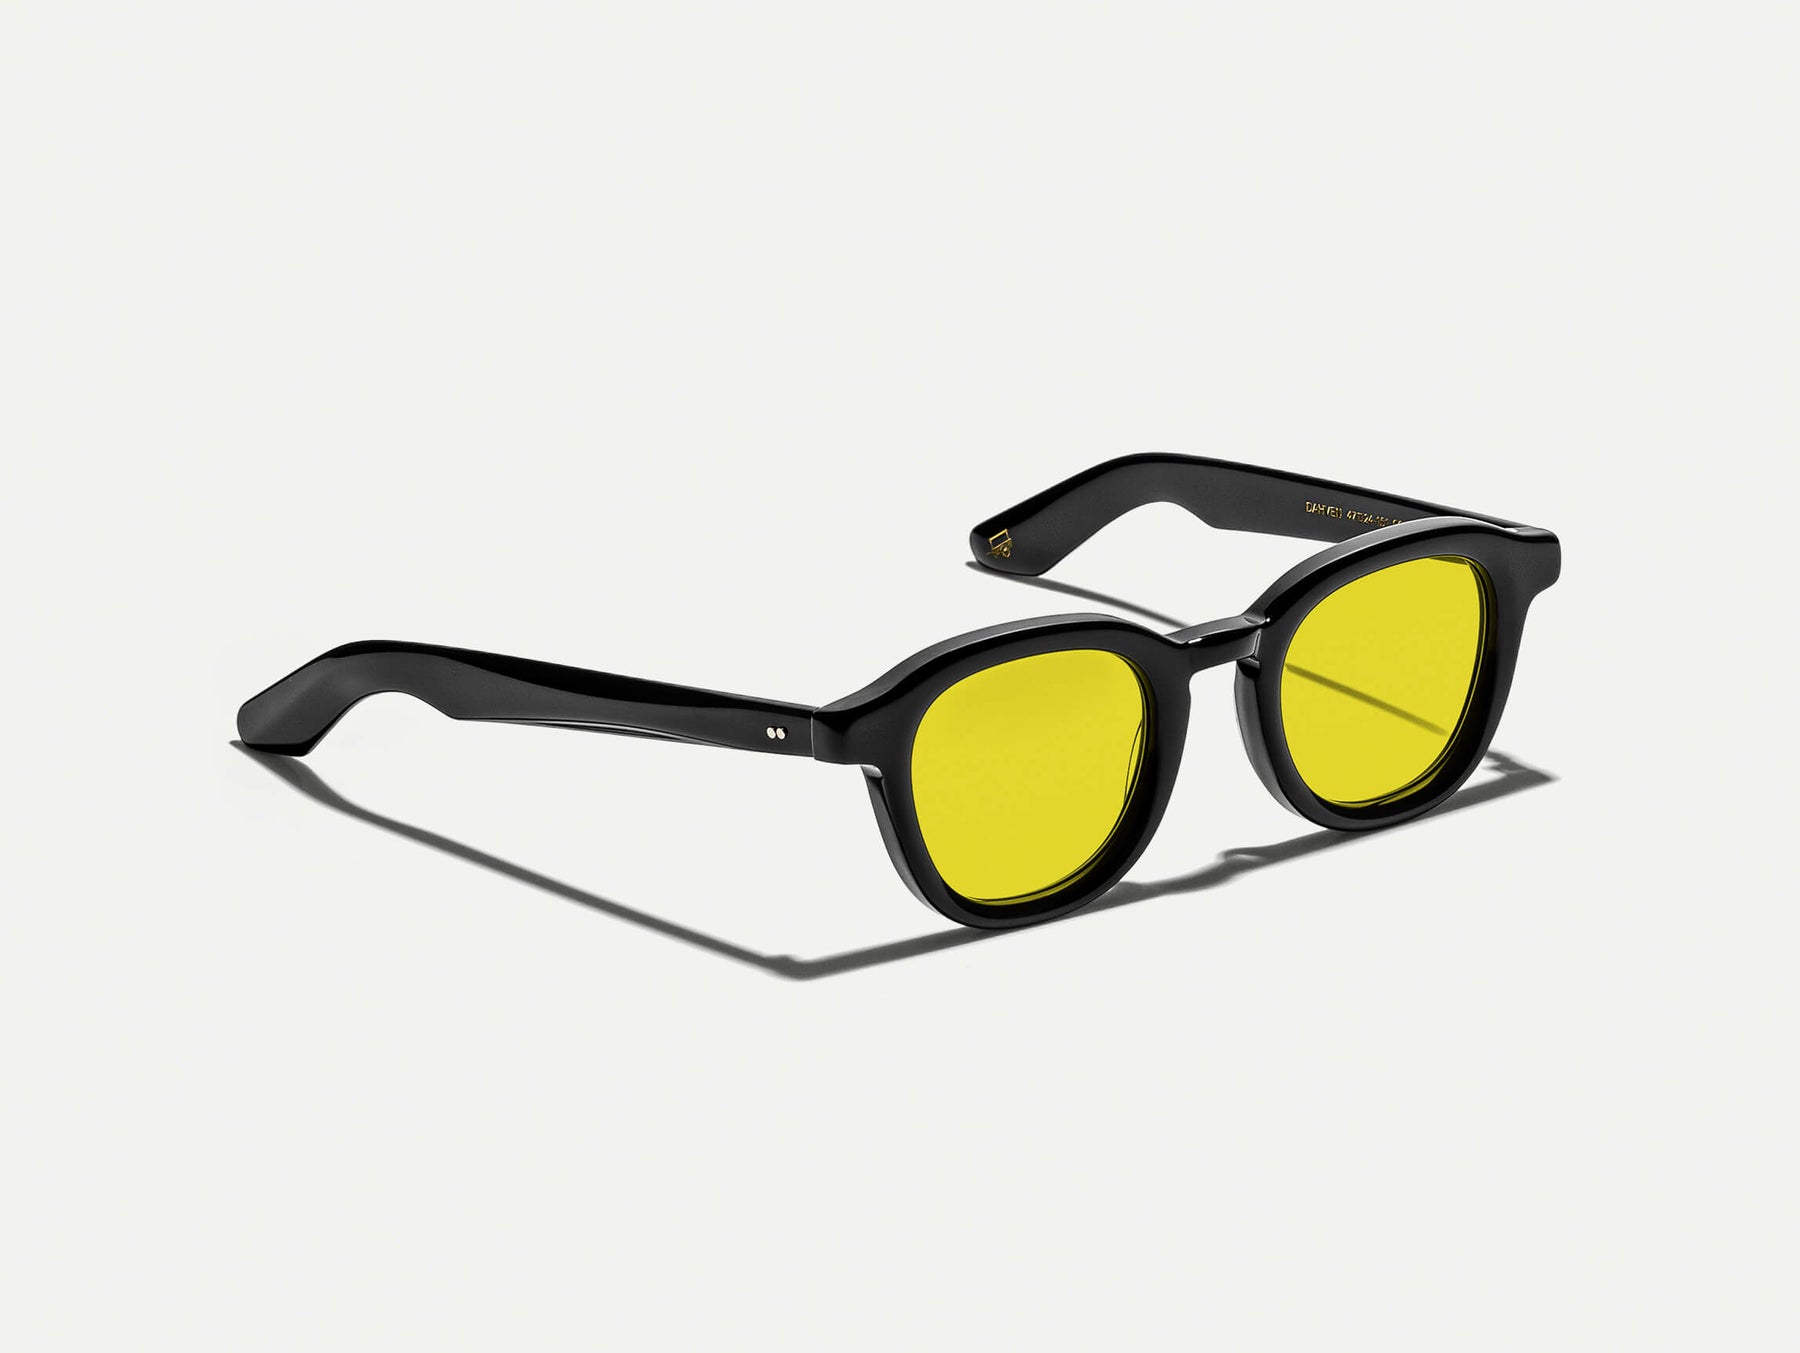 The DAHVEN Black with Mellow Yellow Tinted Lenses